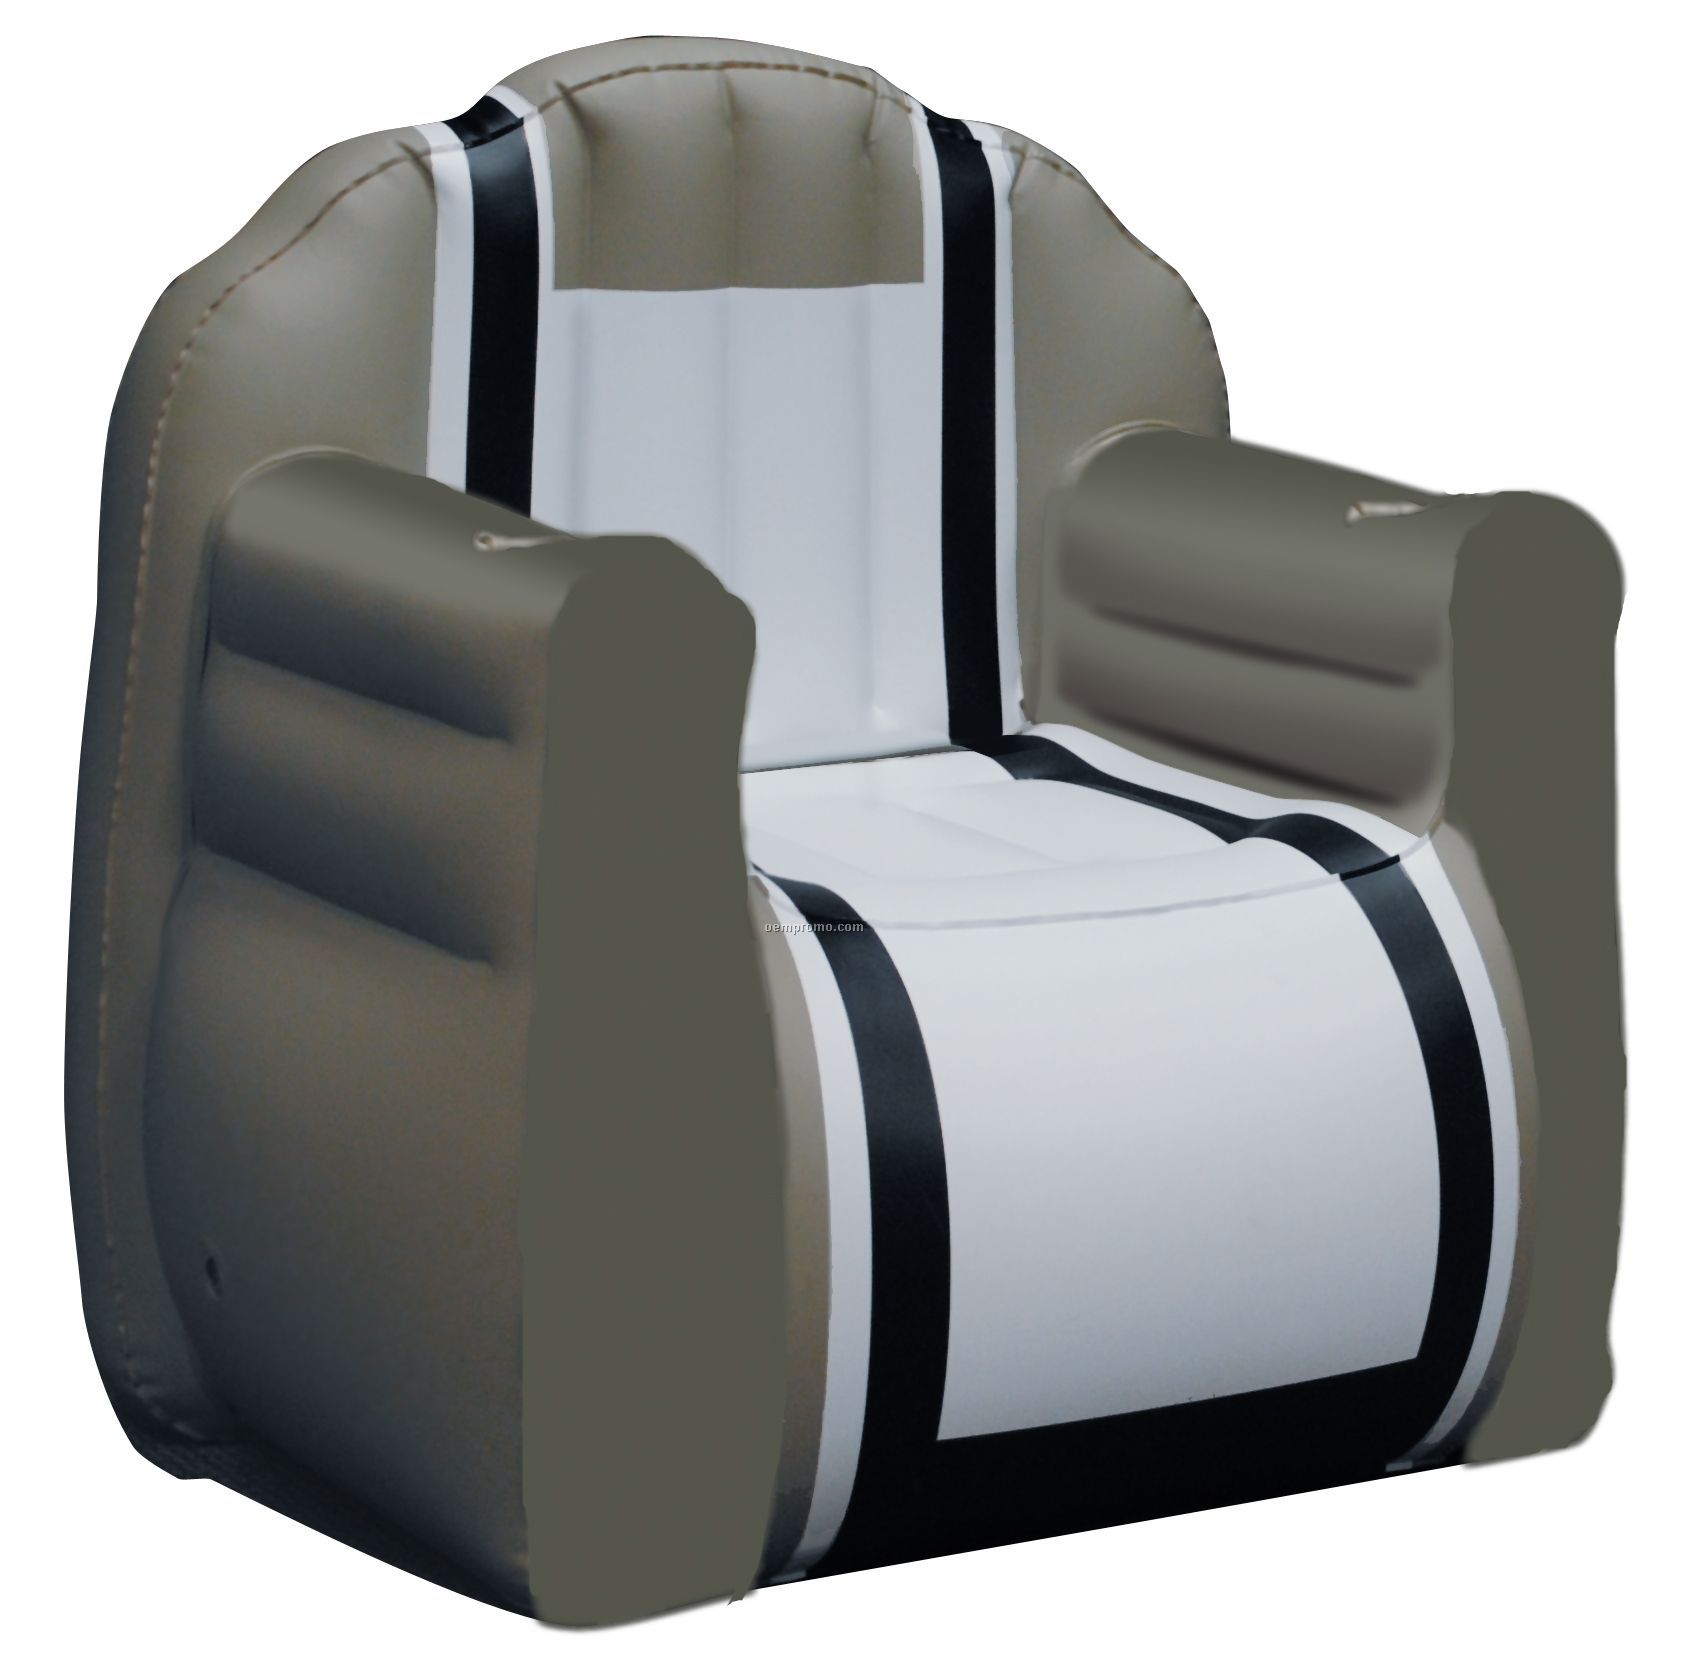 Inflate-a-seat "Chair": Gray/White/Black